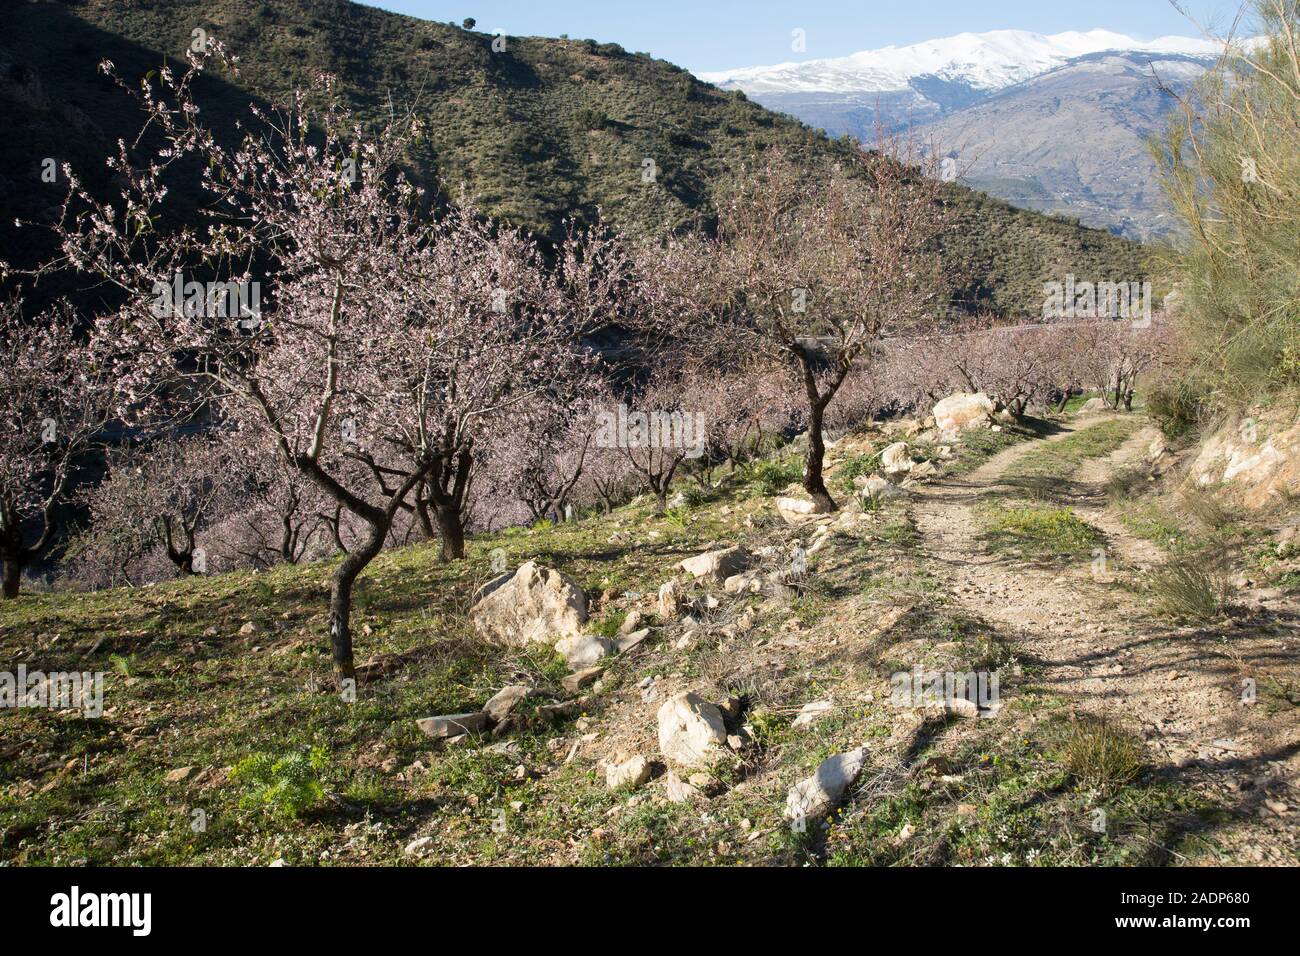 Almond trees covered in pink blossom on agricultural man-made terraces in the mountains of the Sierra Lujar, Alpujarra valley, Andalusia, Spain Stock Photo